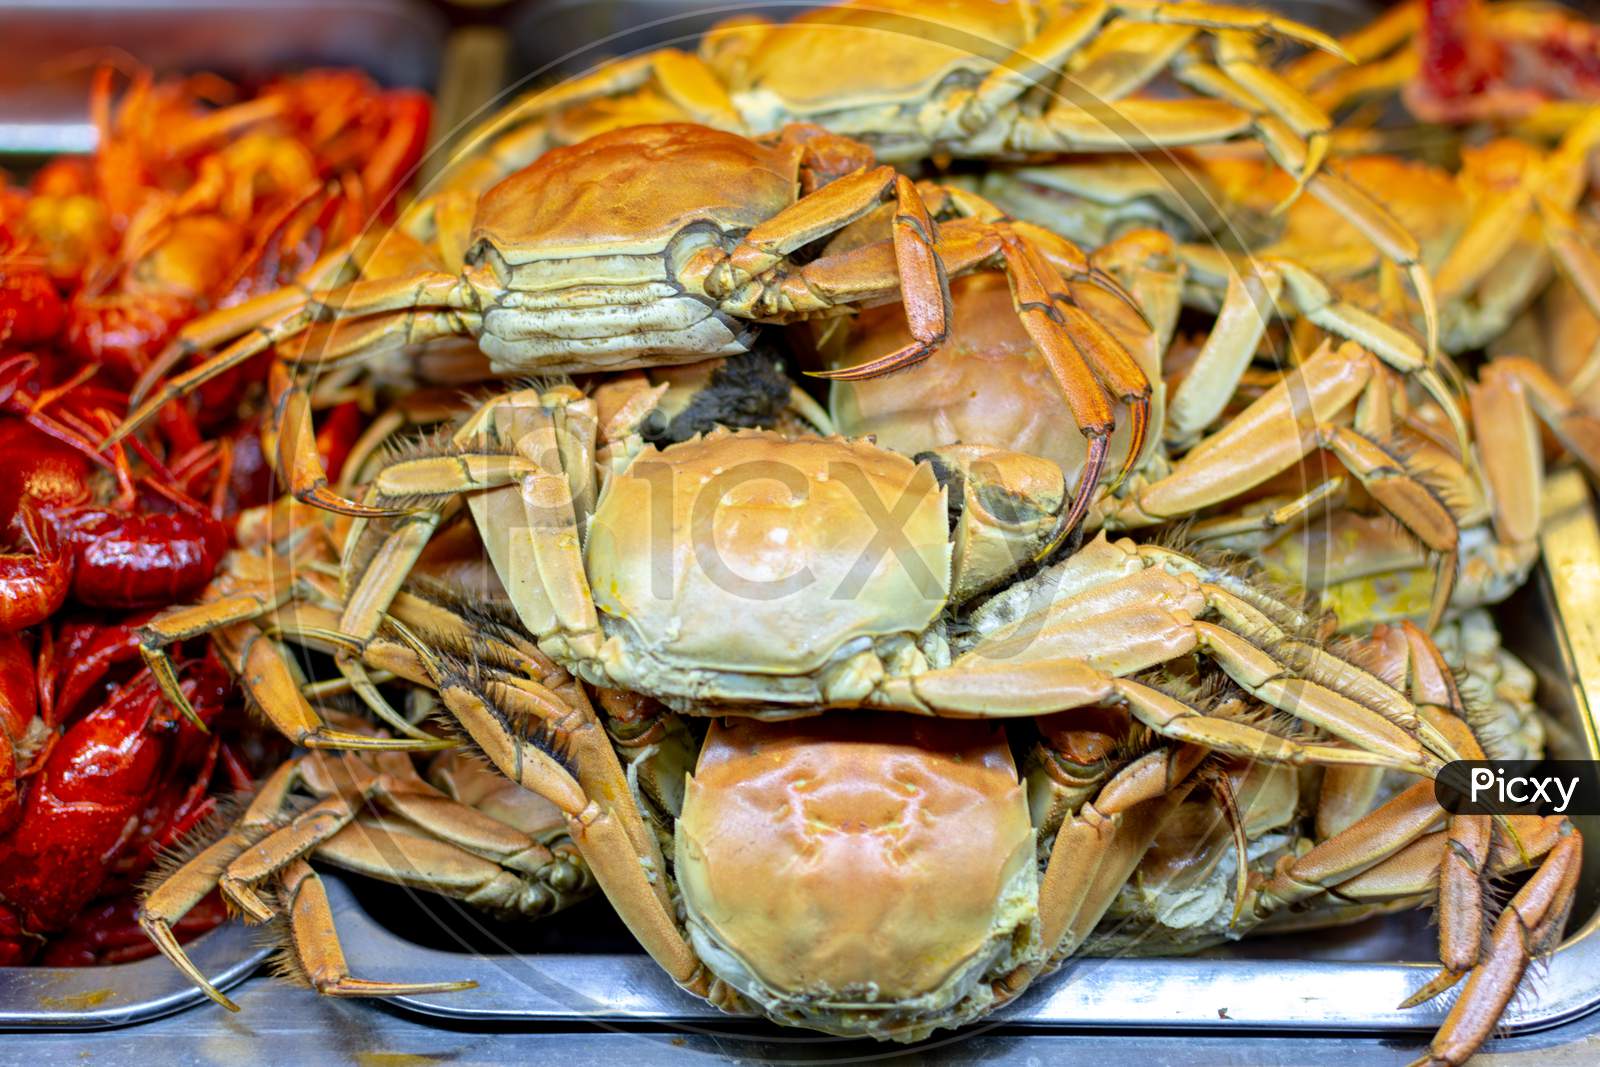 Crabs On The Street Market Food Stall In Luoyang Old City, Henan, China